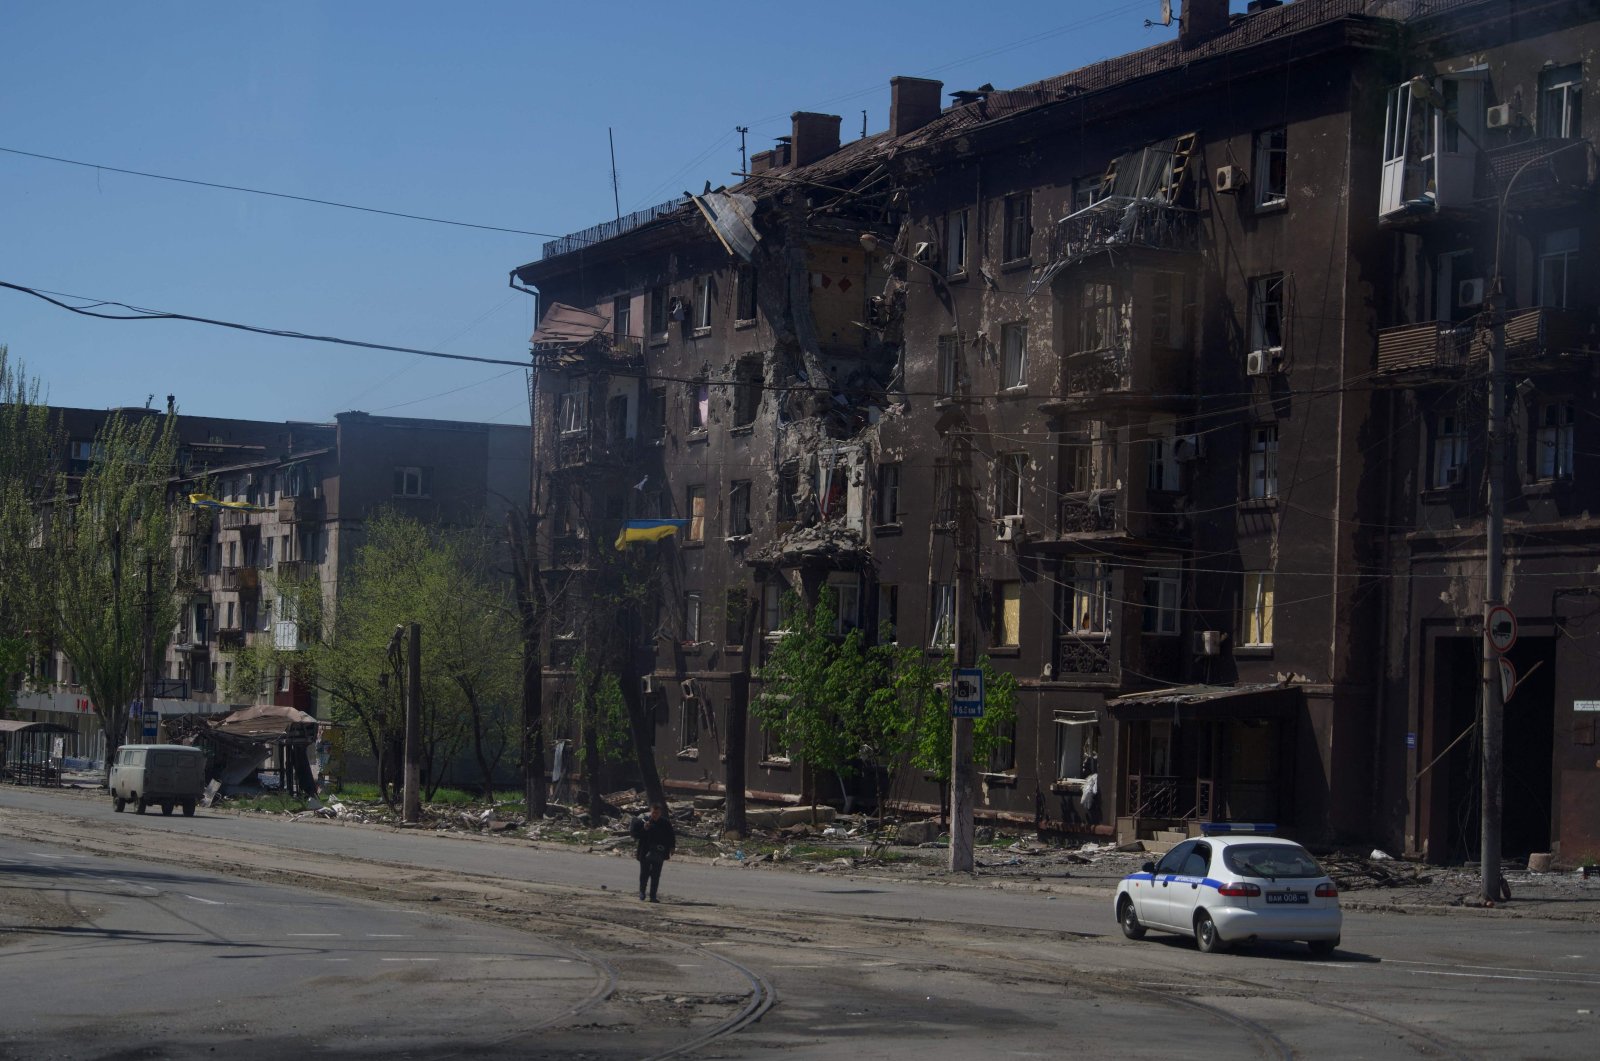 A person walks along a street past a charred residential building amid the ongoing Russian military action in the city of Mariupol, Ukraine, April 29, 2022. (AFP Photo)